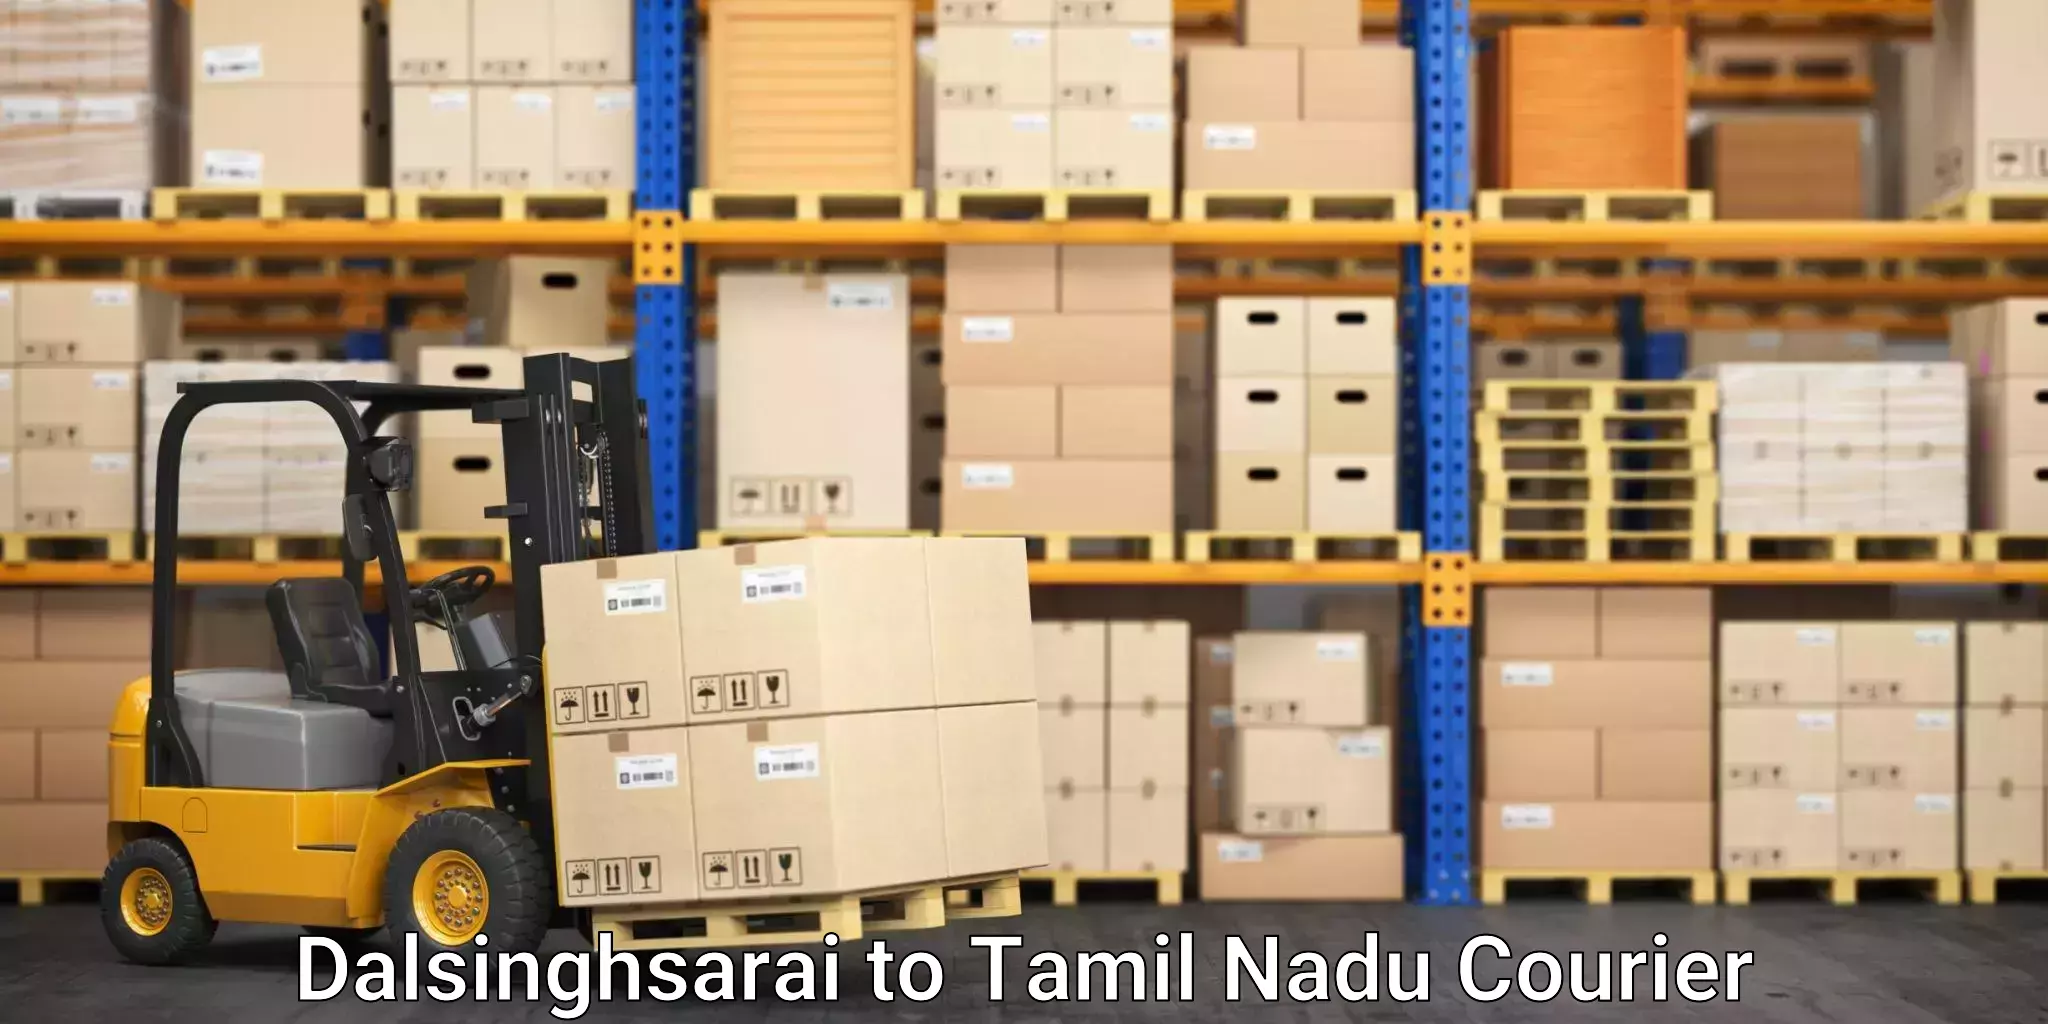 Packing and moving services Dalsinghsarai to Gobichettipalayam